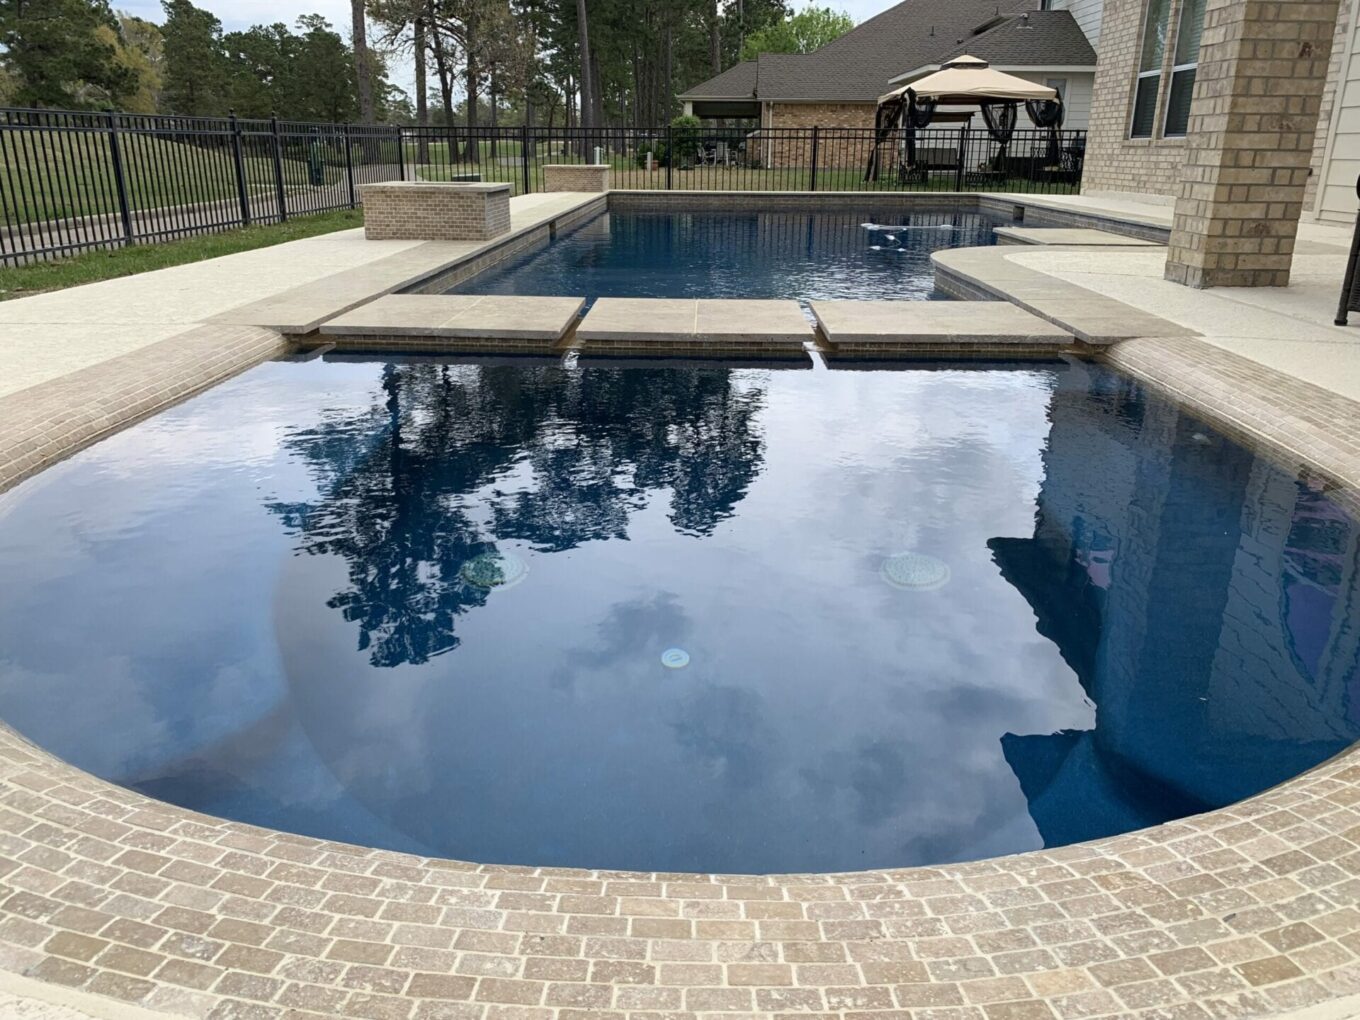 A pool with a brick floor and a blue water